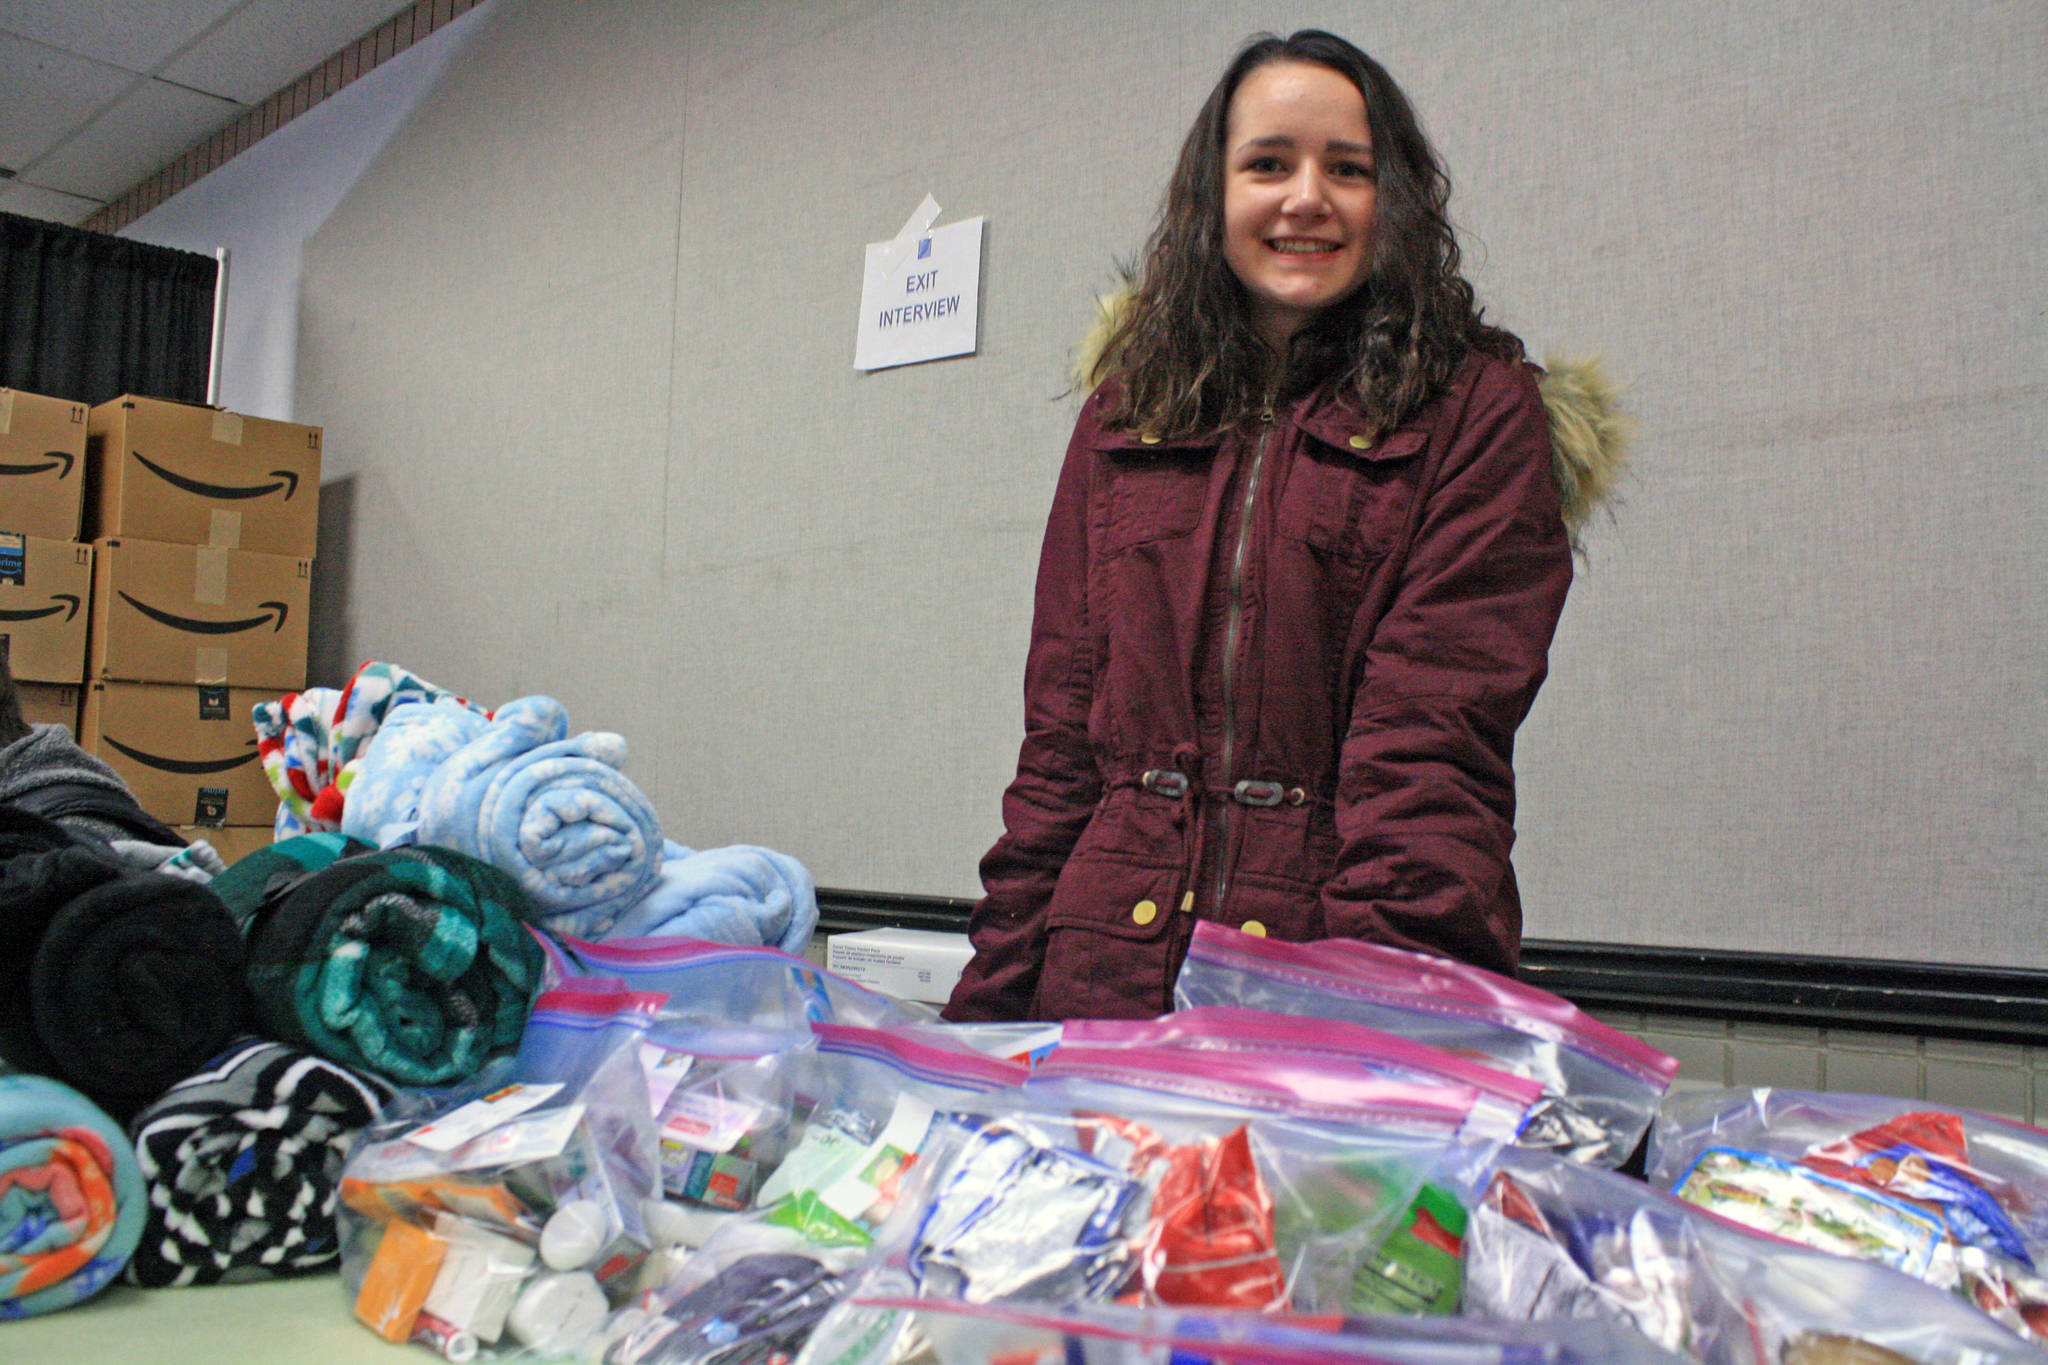 “I really enjoy doing this event and helping people.” — Catie Kline, volunteer